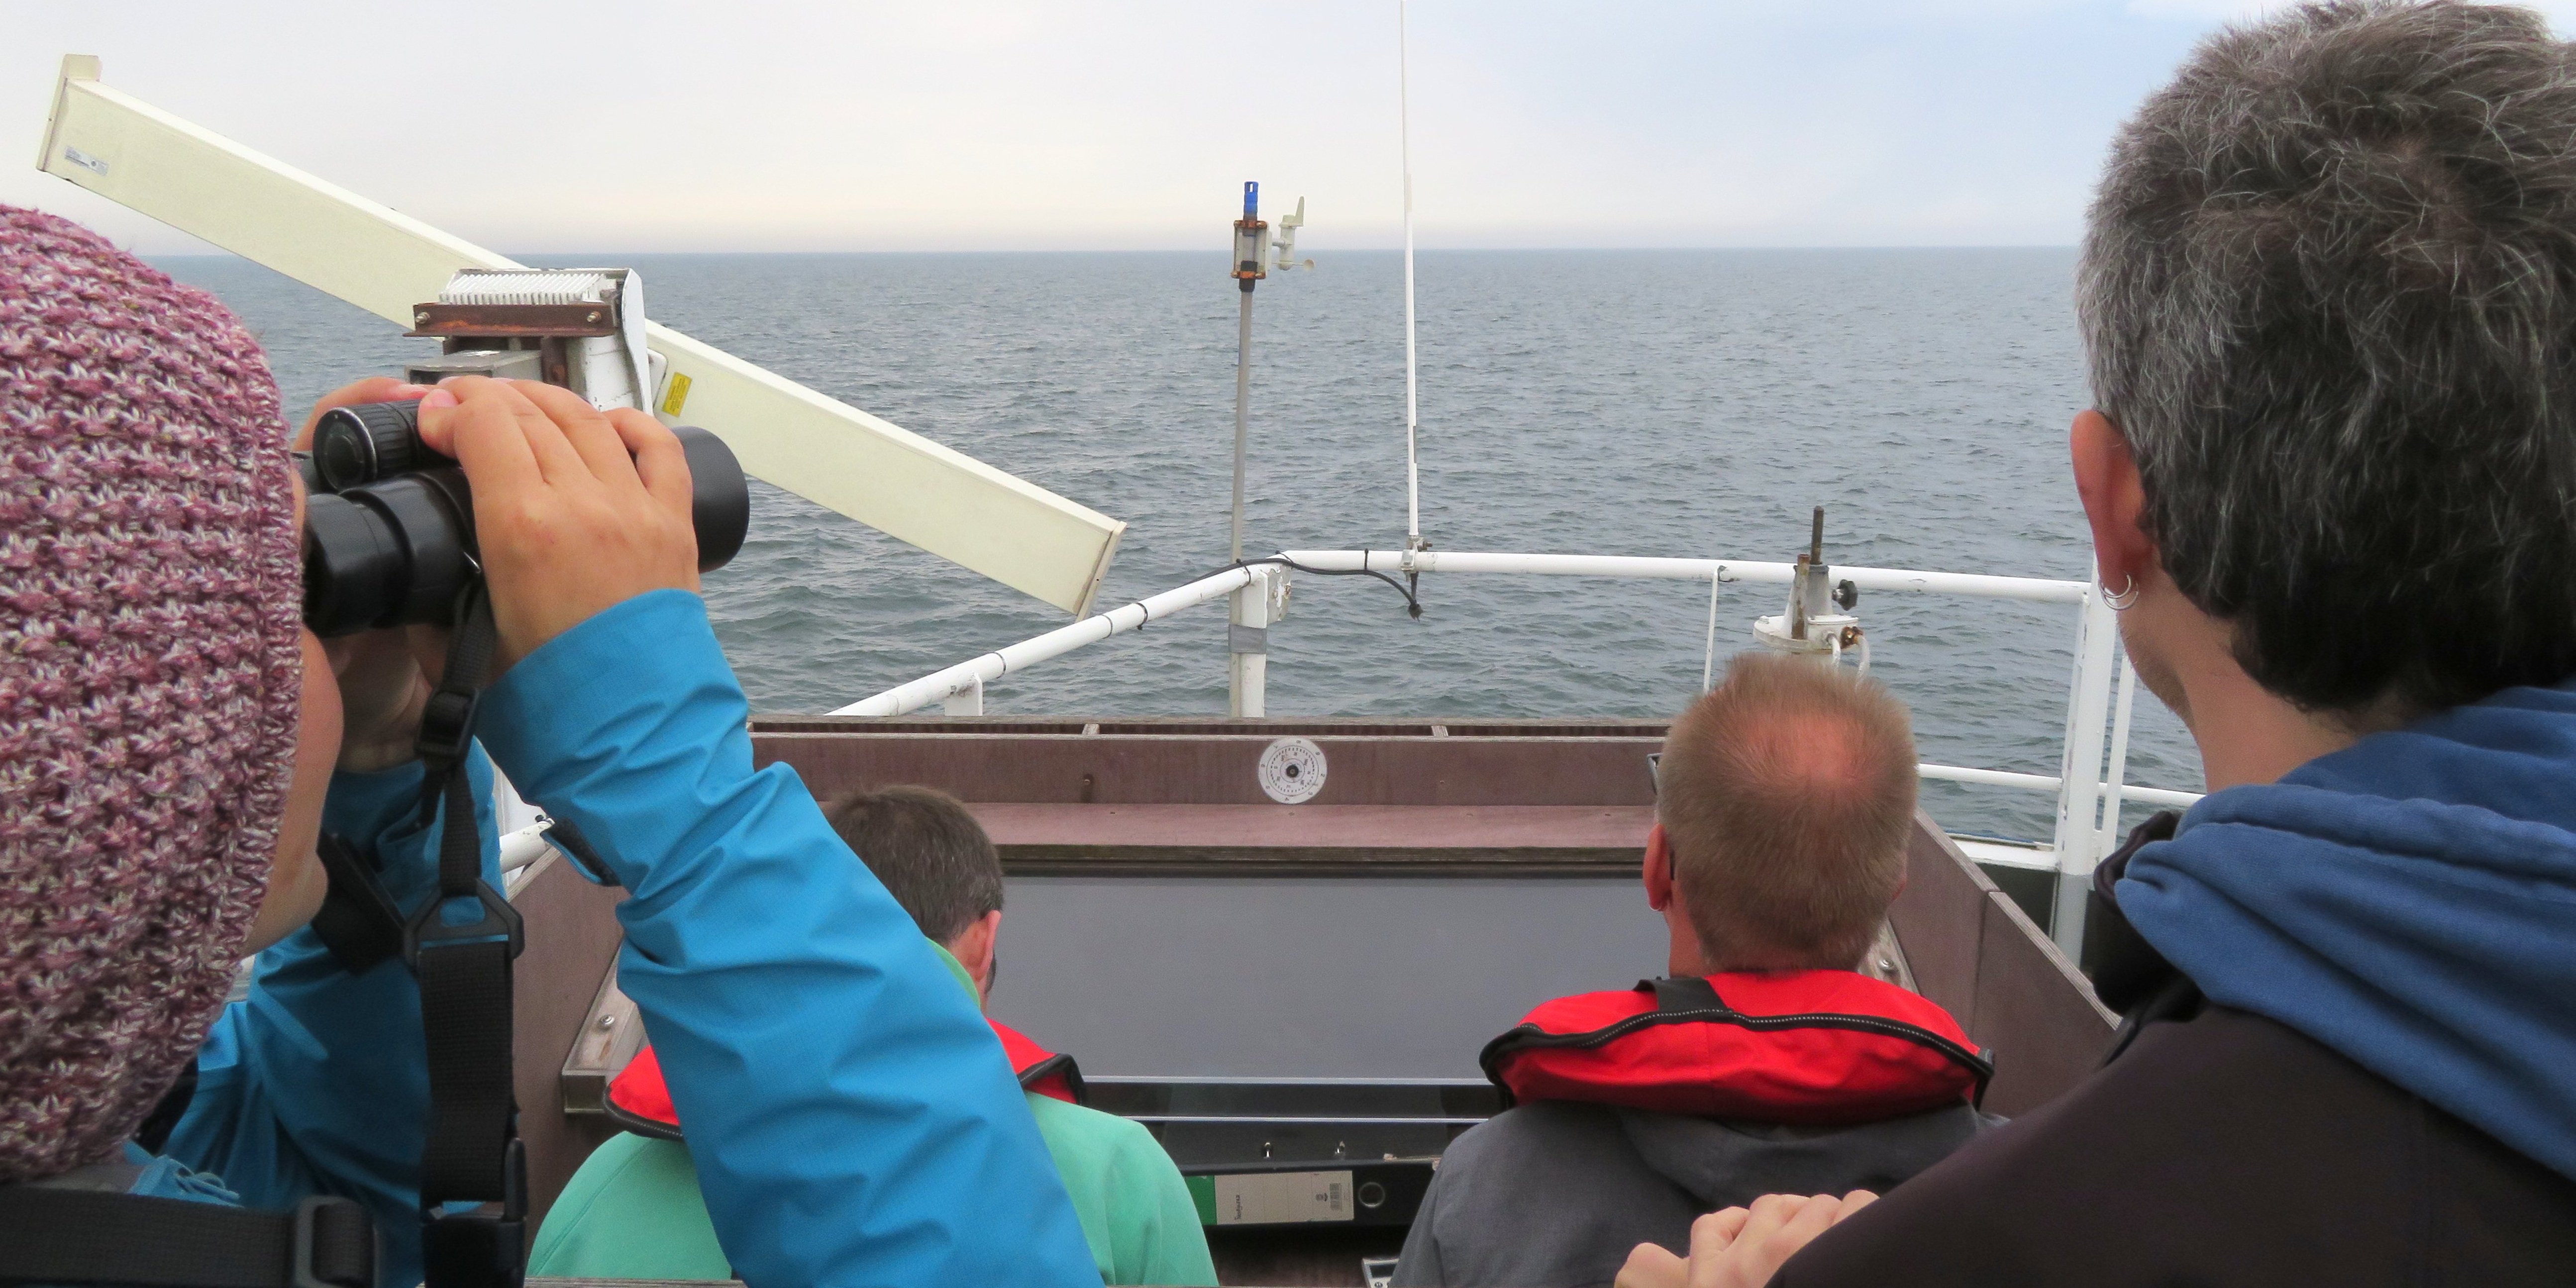 From behind, four people can be seen surveying birds and mammals at sea from the deck of a ship.